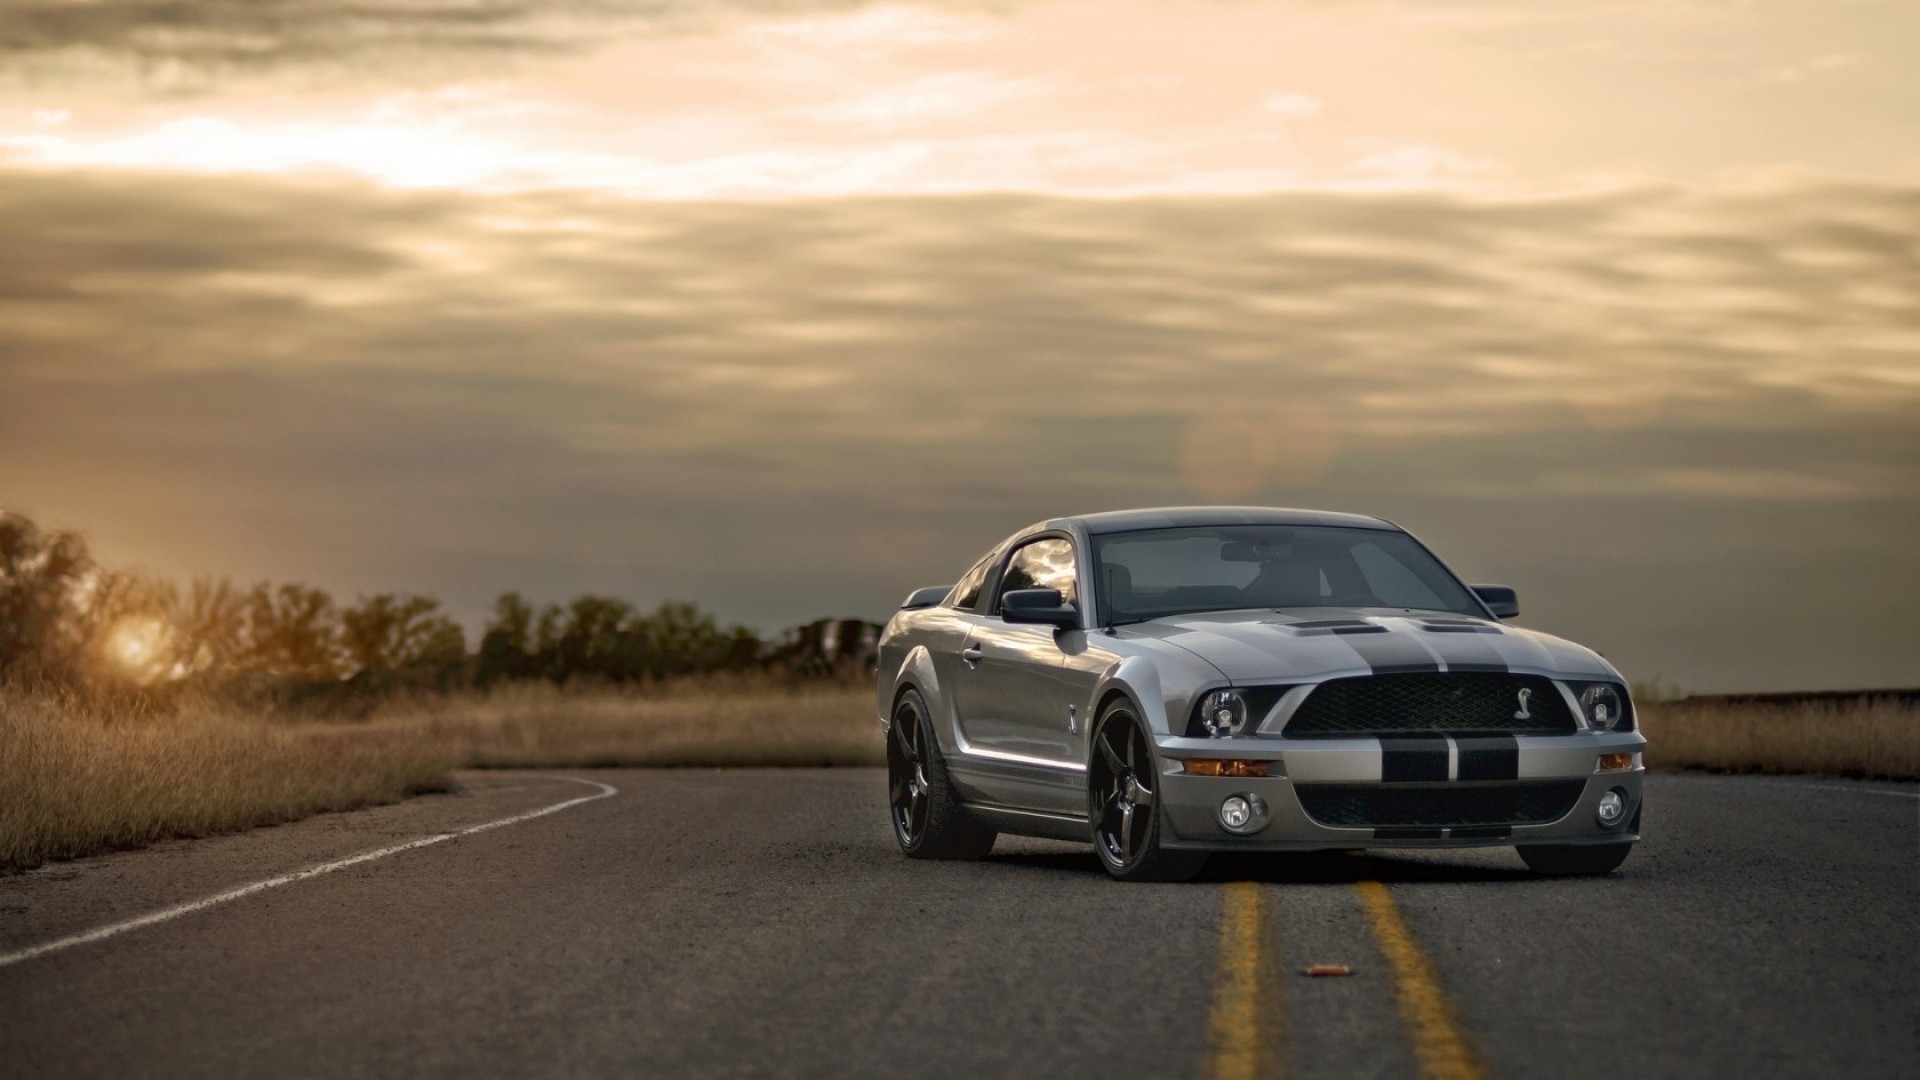 1920x1080  Wallpaper ford, mustang, shelby, silver, muscle car, road, sunset